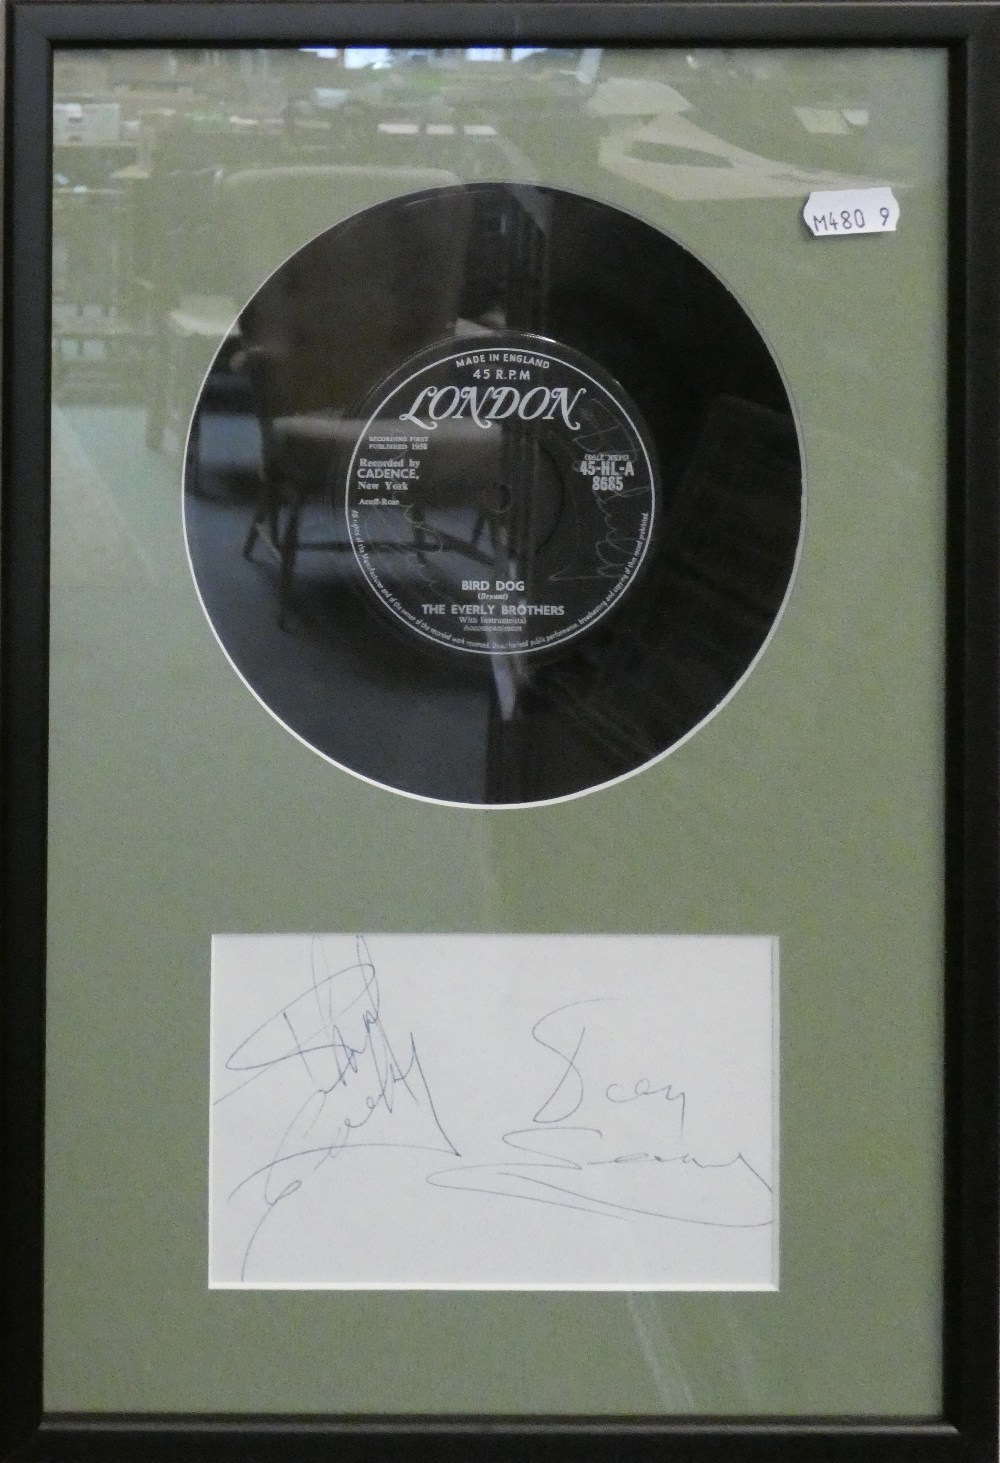 A signed and framed photograph and 45RPM record by Paul Anka, featuring 'Diana', together with a - Image 2 of 3